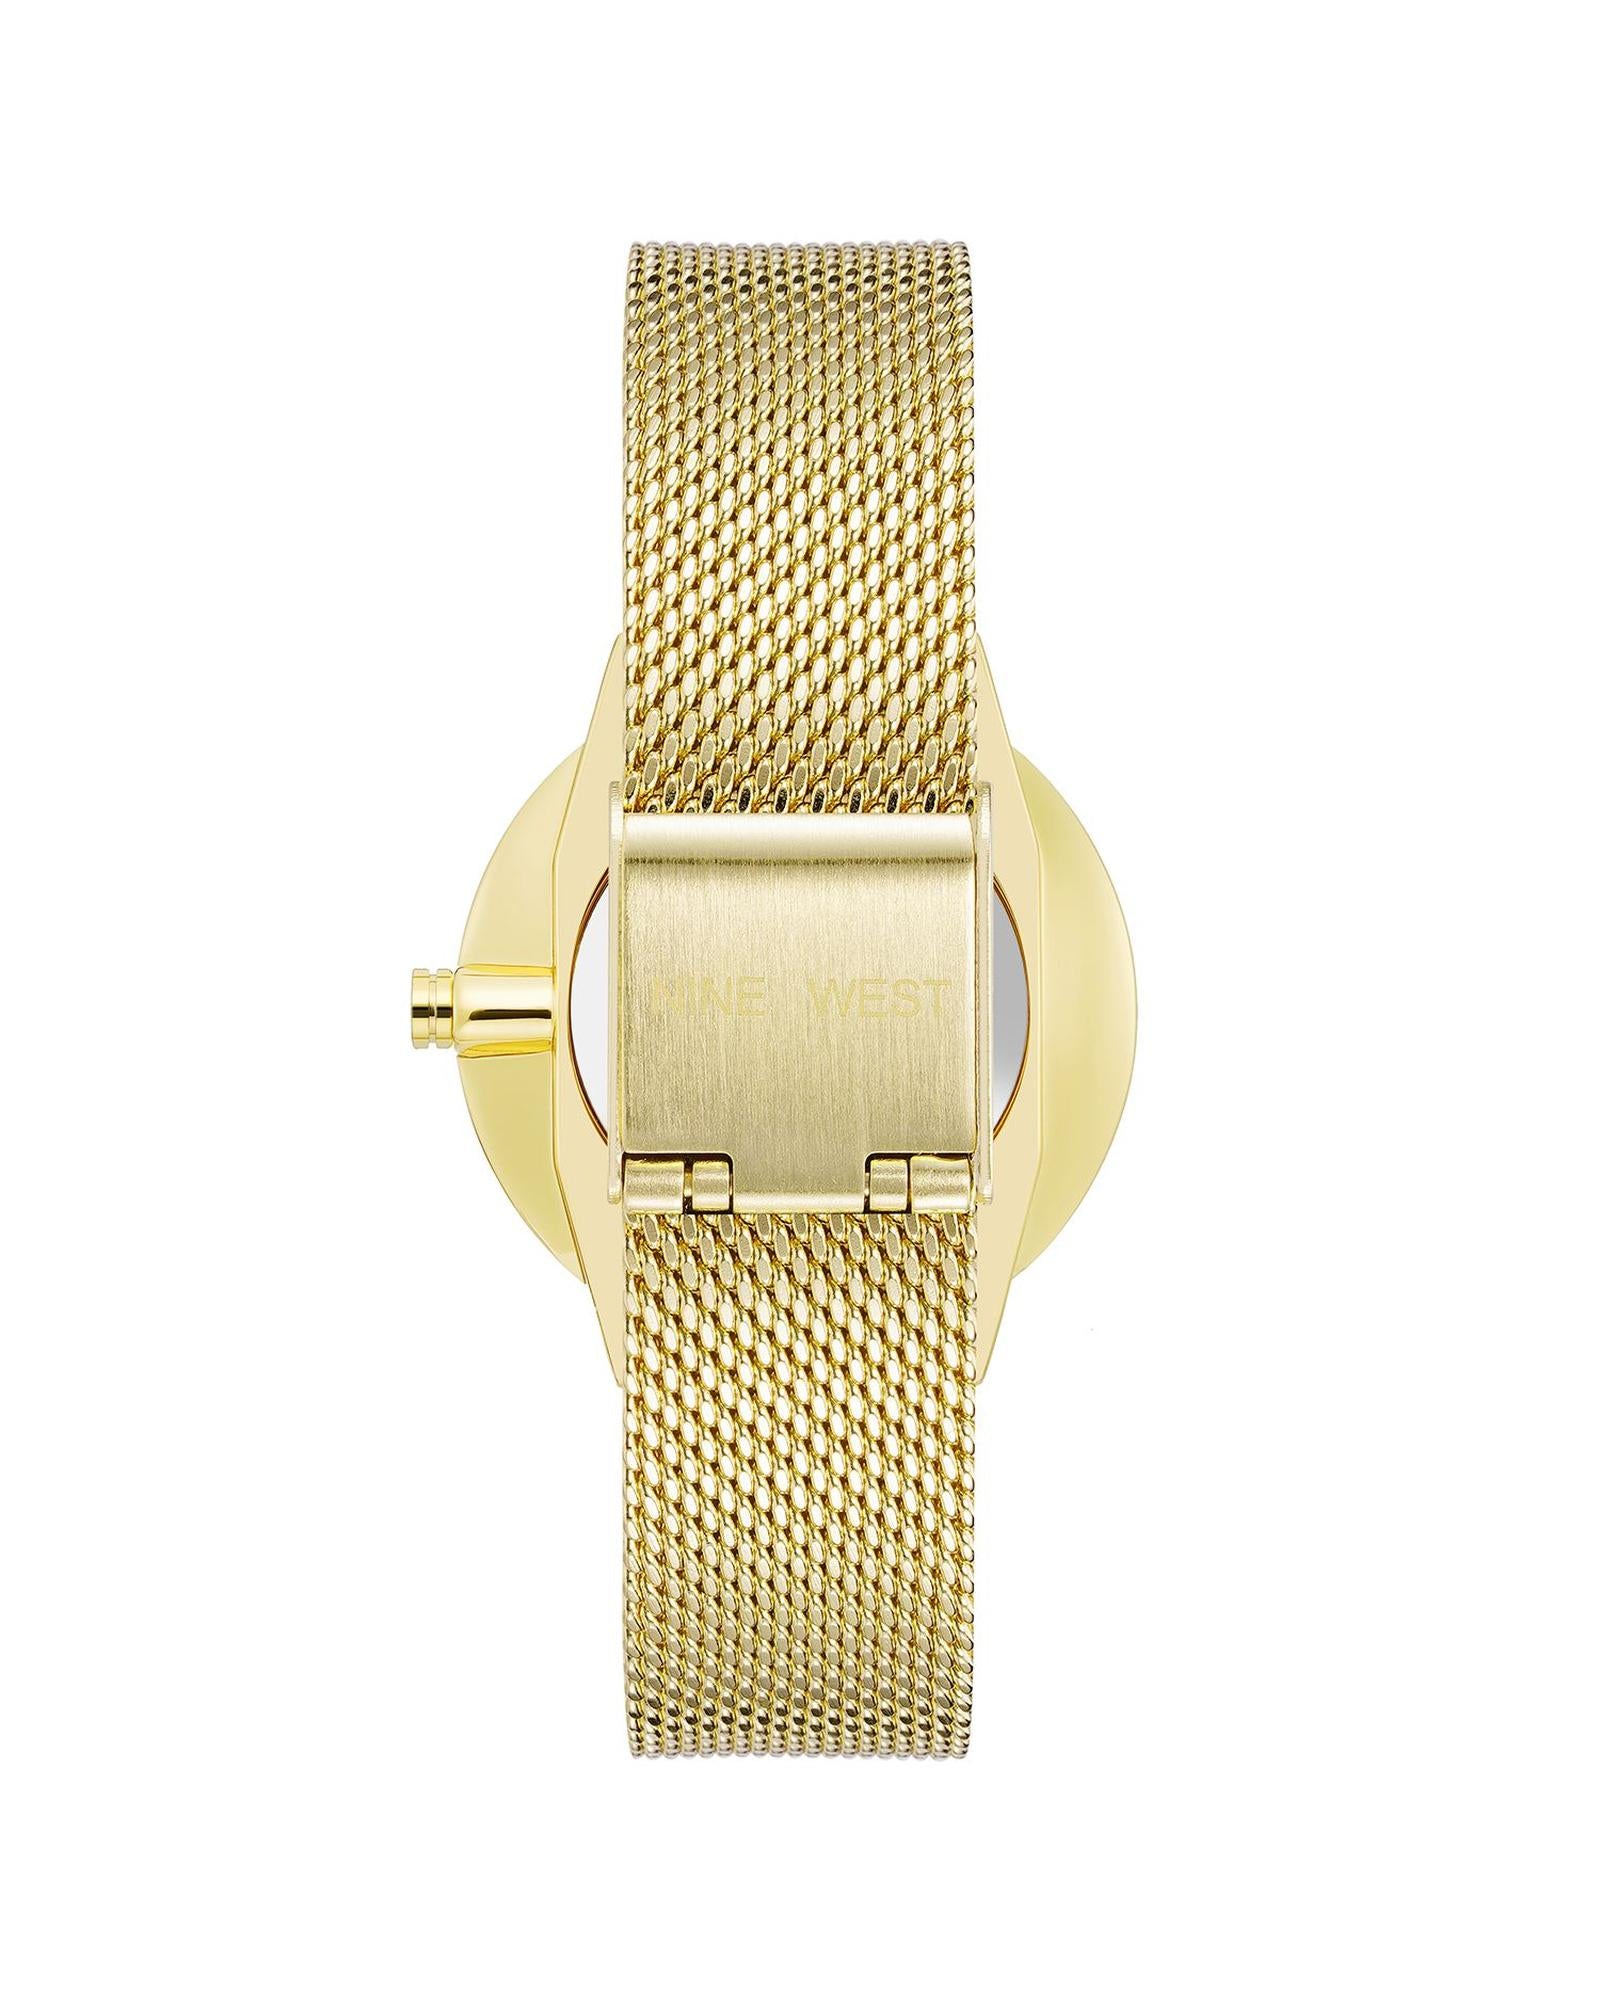 Gold Analog Bangle Watch with Dual Time Functions One Size Women